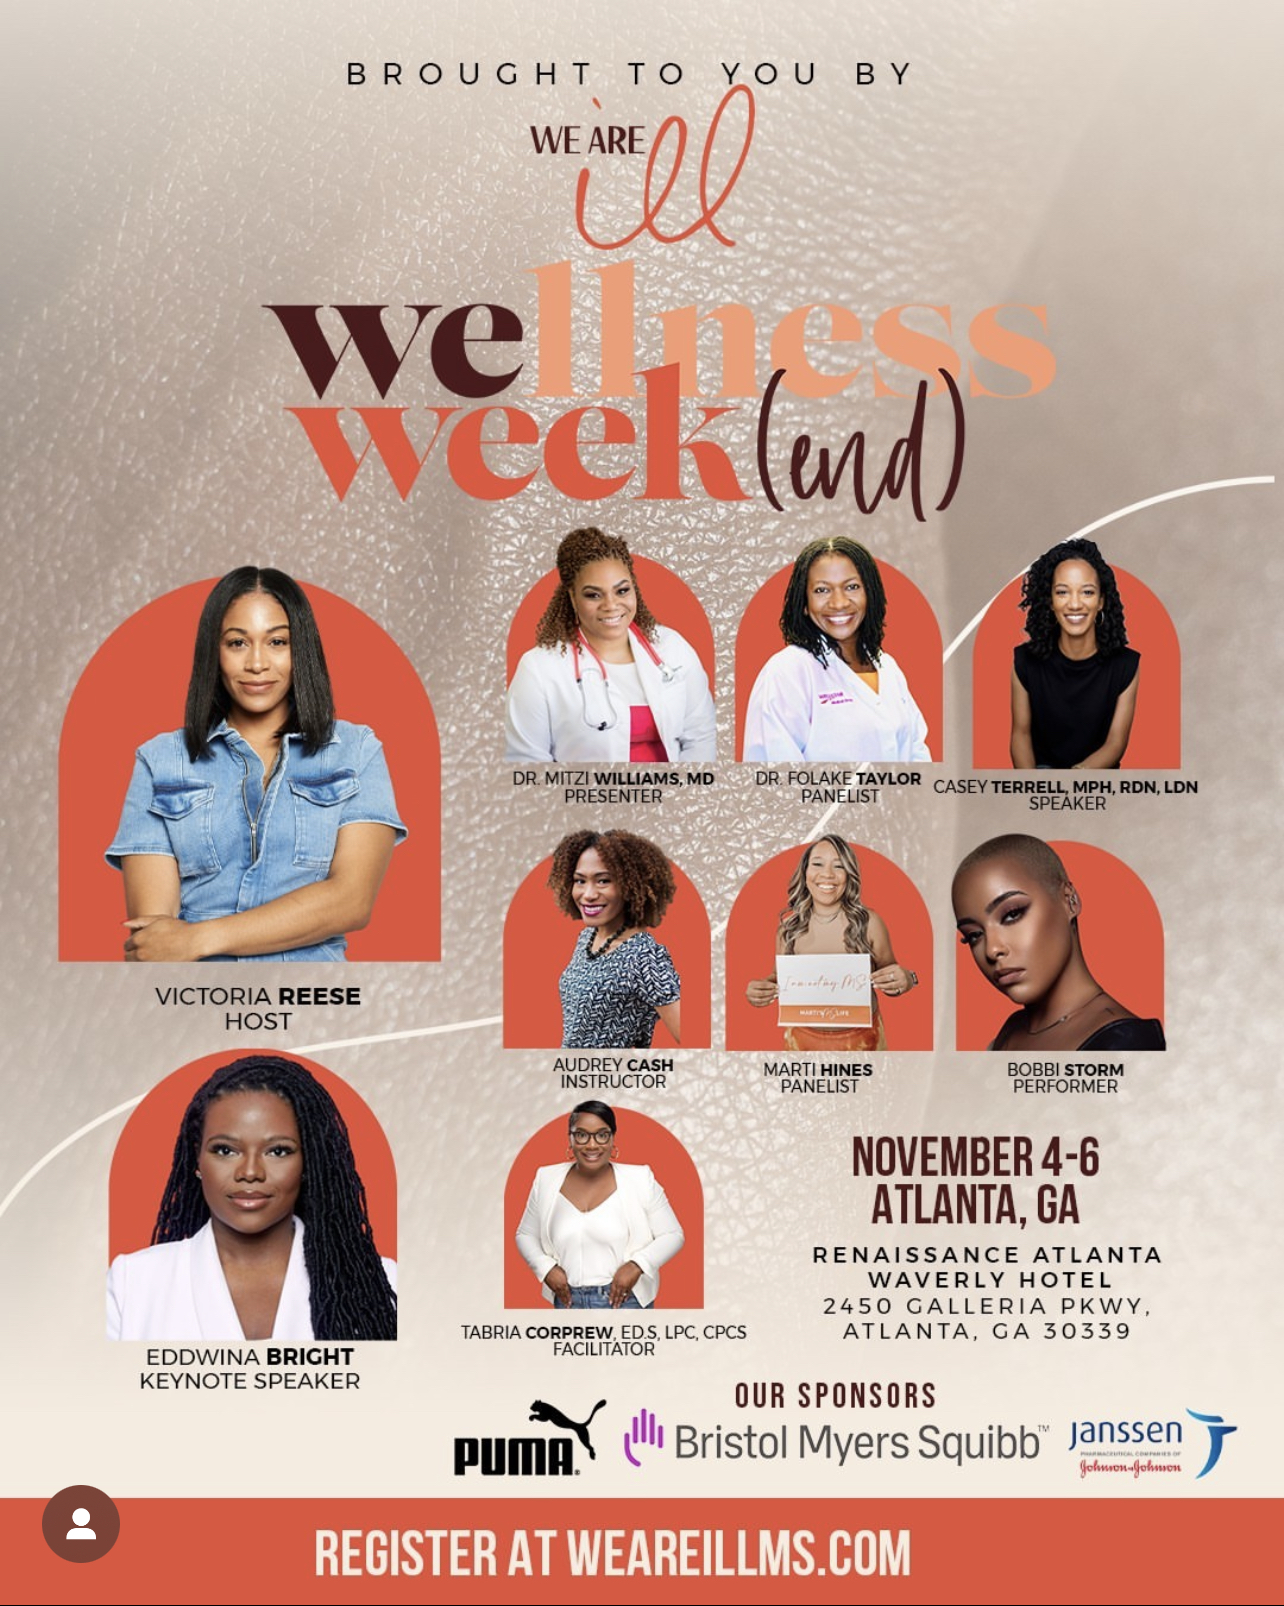 Flyer for We Are Ill Wellness Weekend